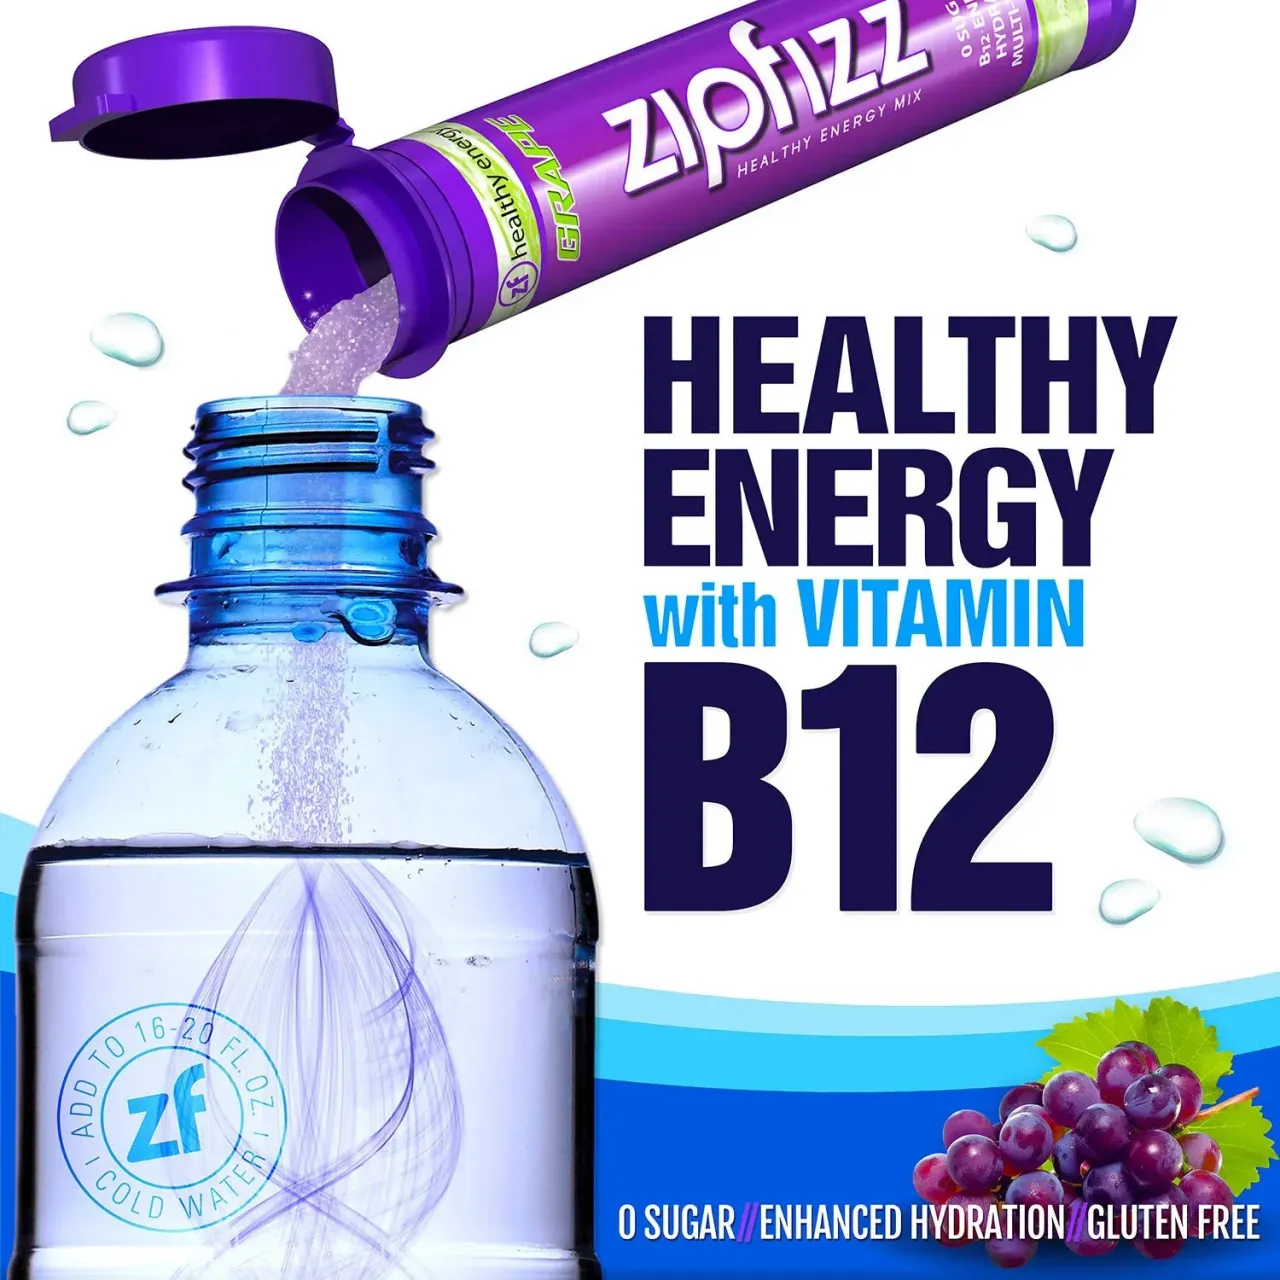 4 Zipfizz Multi-Vitamin Energy Hydration Drink Mix, Variety Pack, 30 Tubes